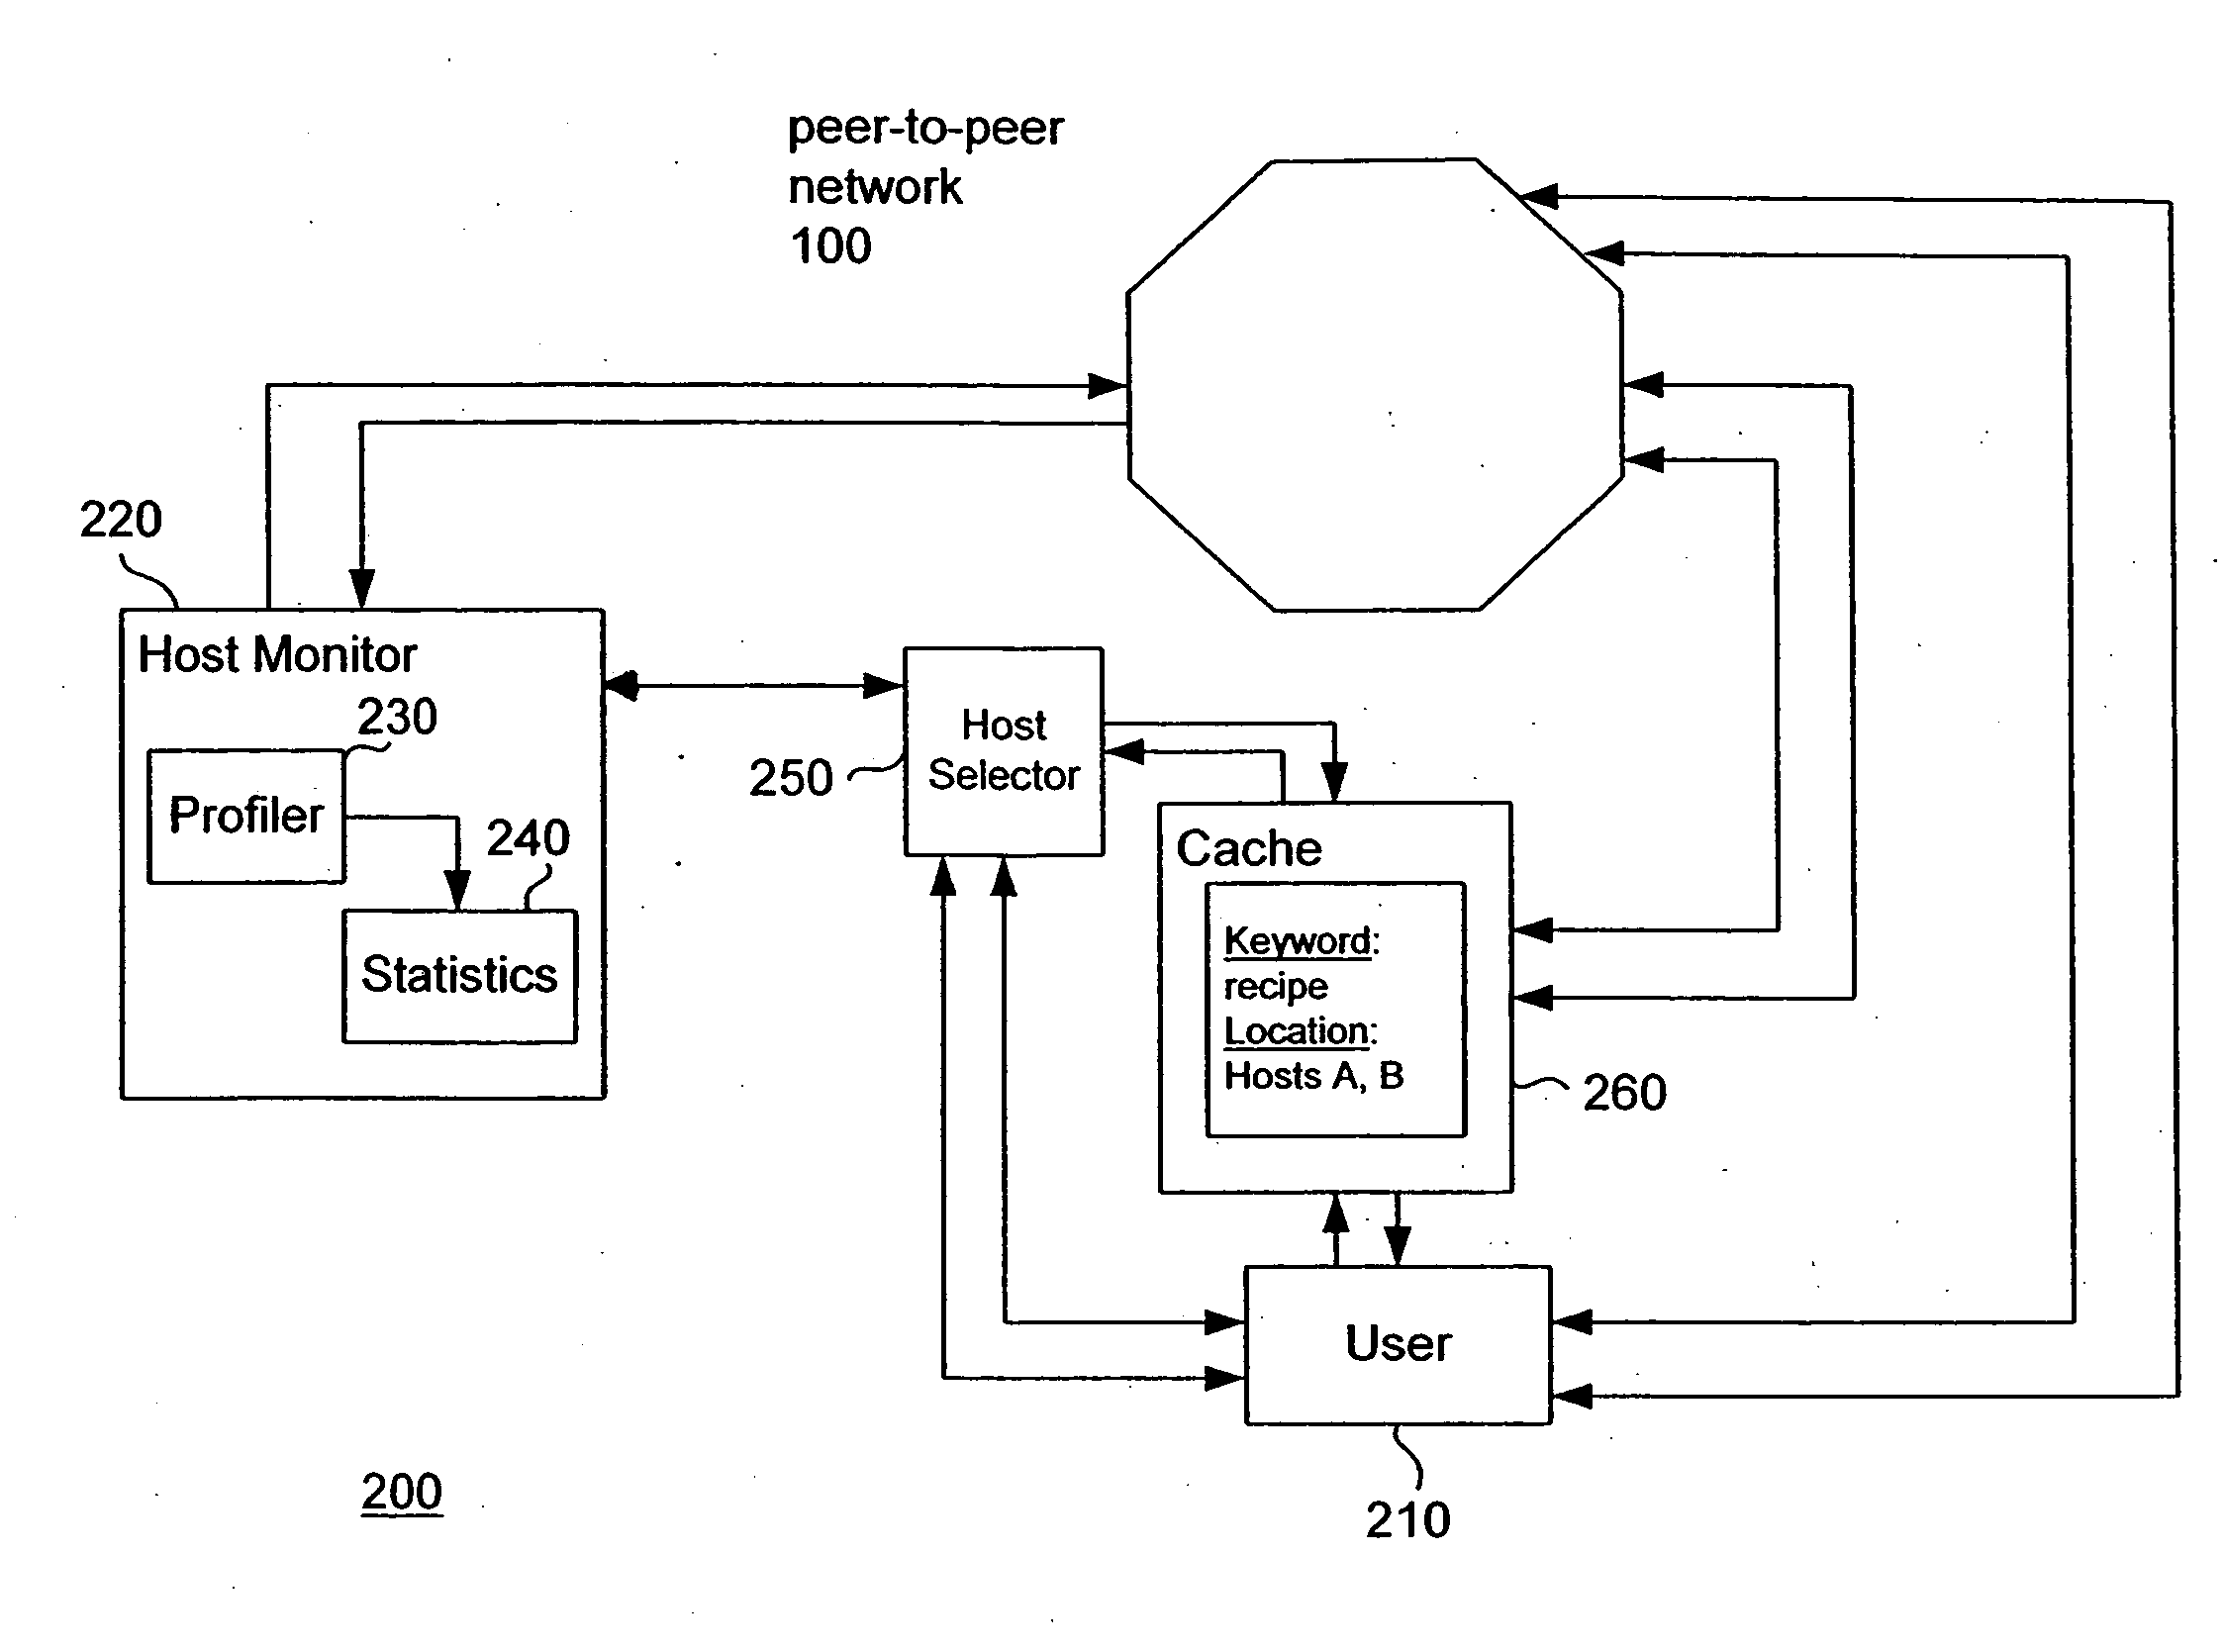 System and method for searching peer-to-peer computer networks